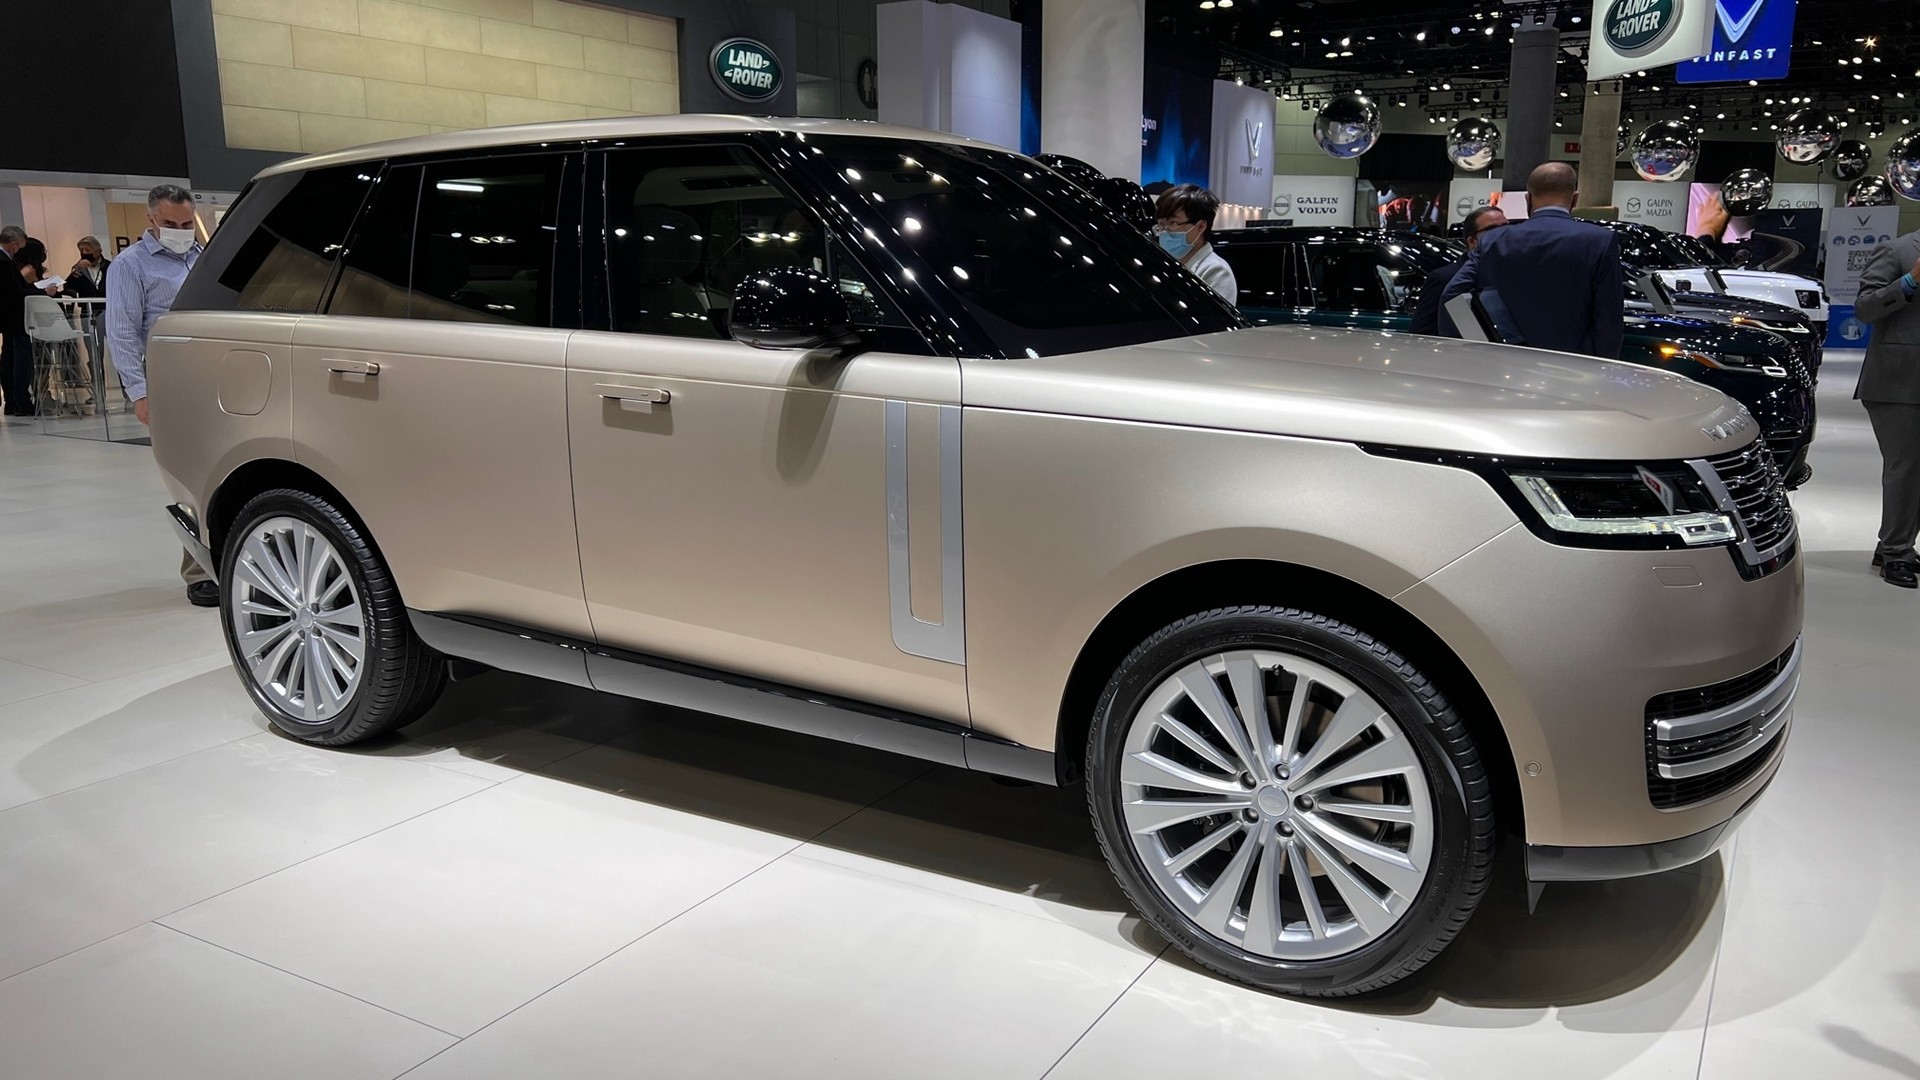 all-new-2022-range-rover-visits-la-auto-show-to-entice-its-target-audience-2.jpg